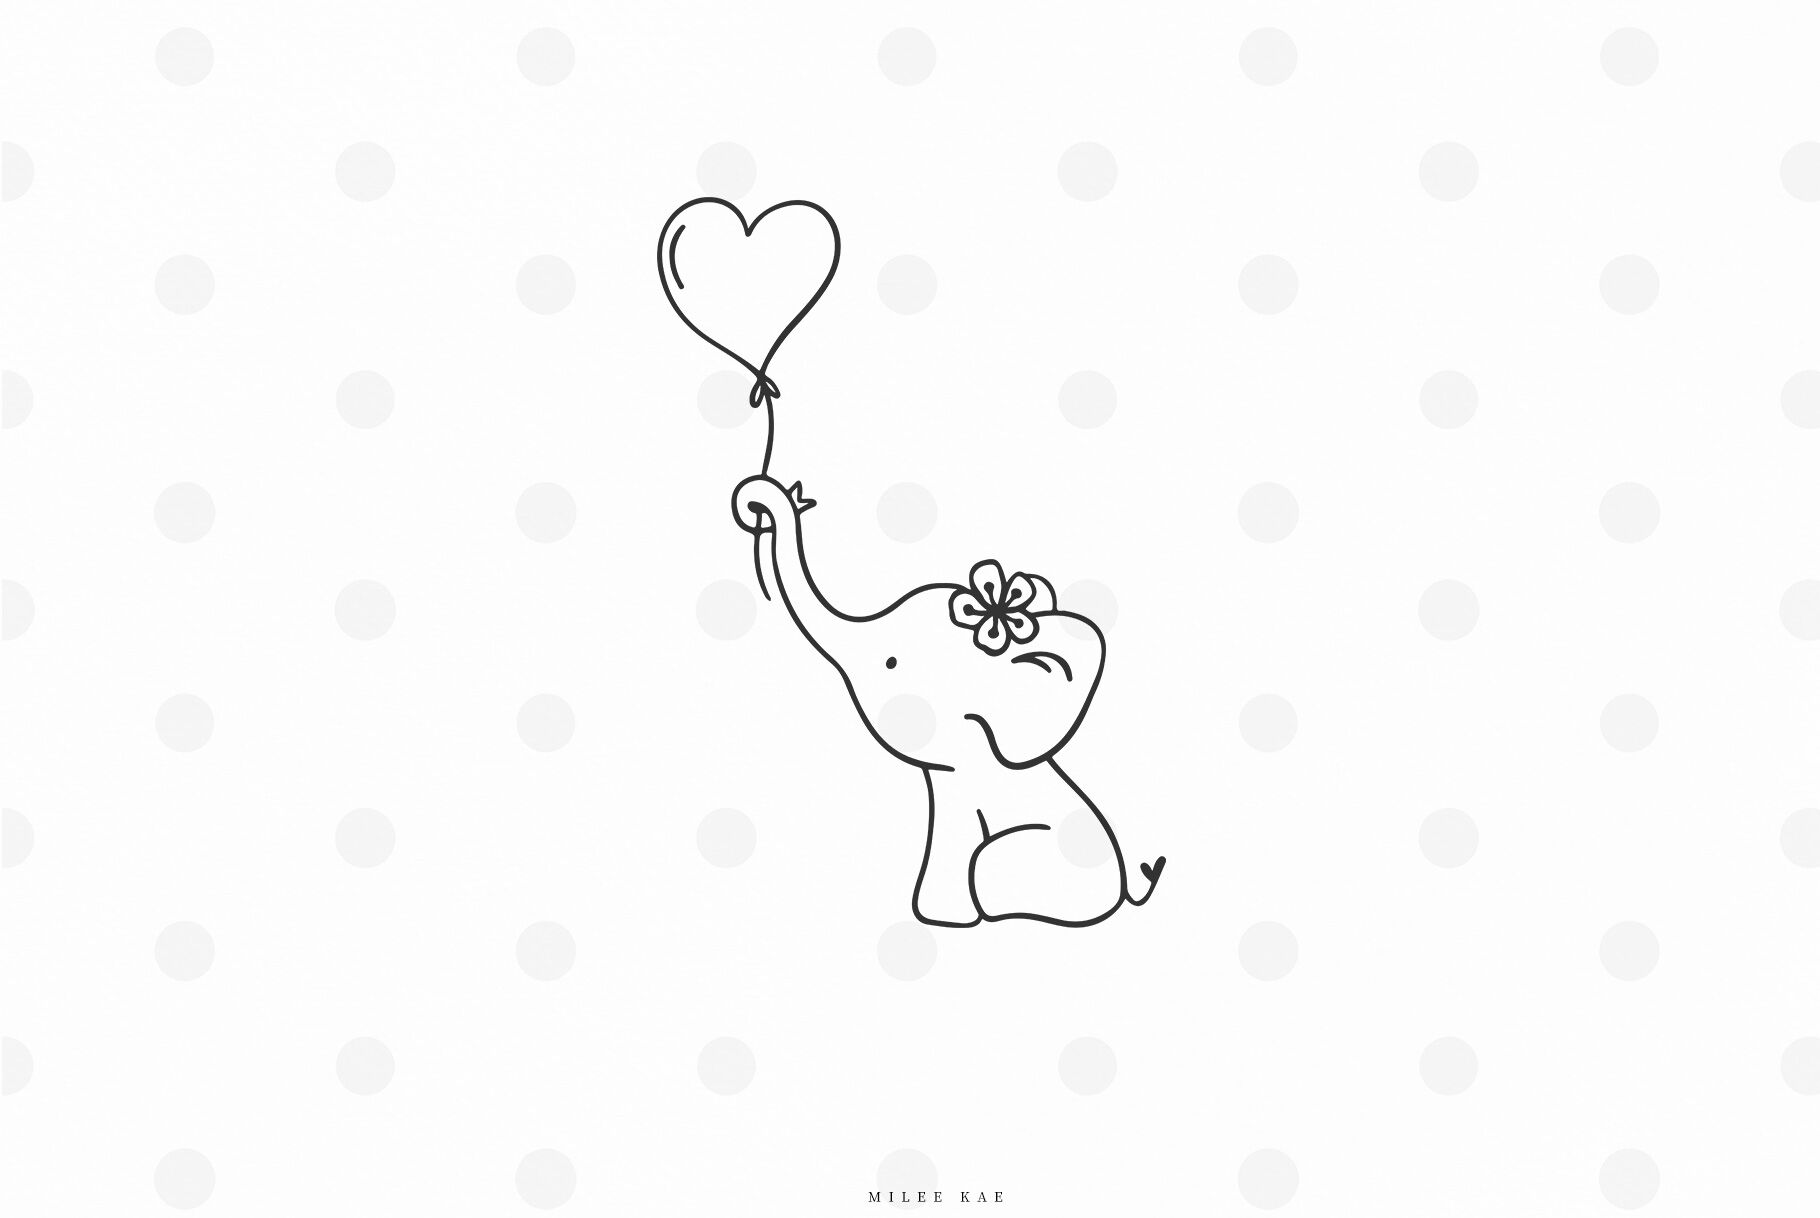 Download Clip Art 0130 Svg Eps Jpg Png Files Svg Elephant With Balloons Clipart For Scrapbooking And Commercial Use Art Collectibles